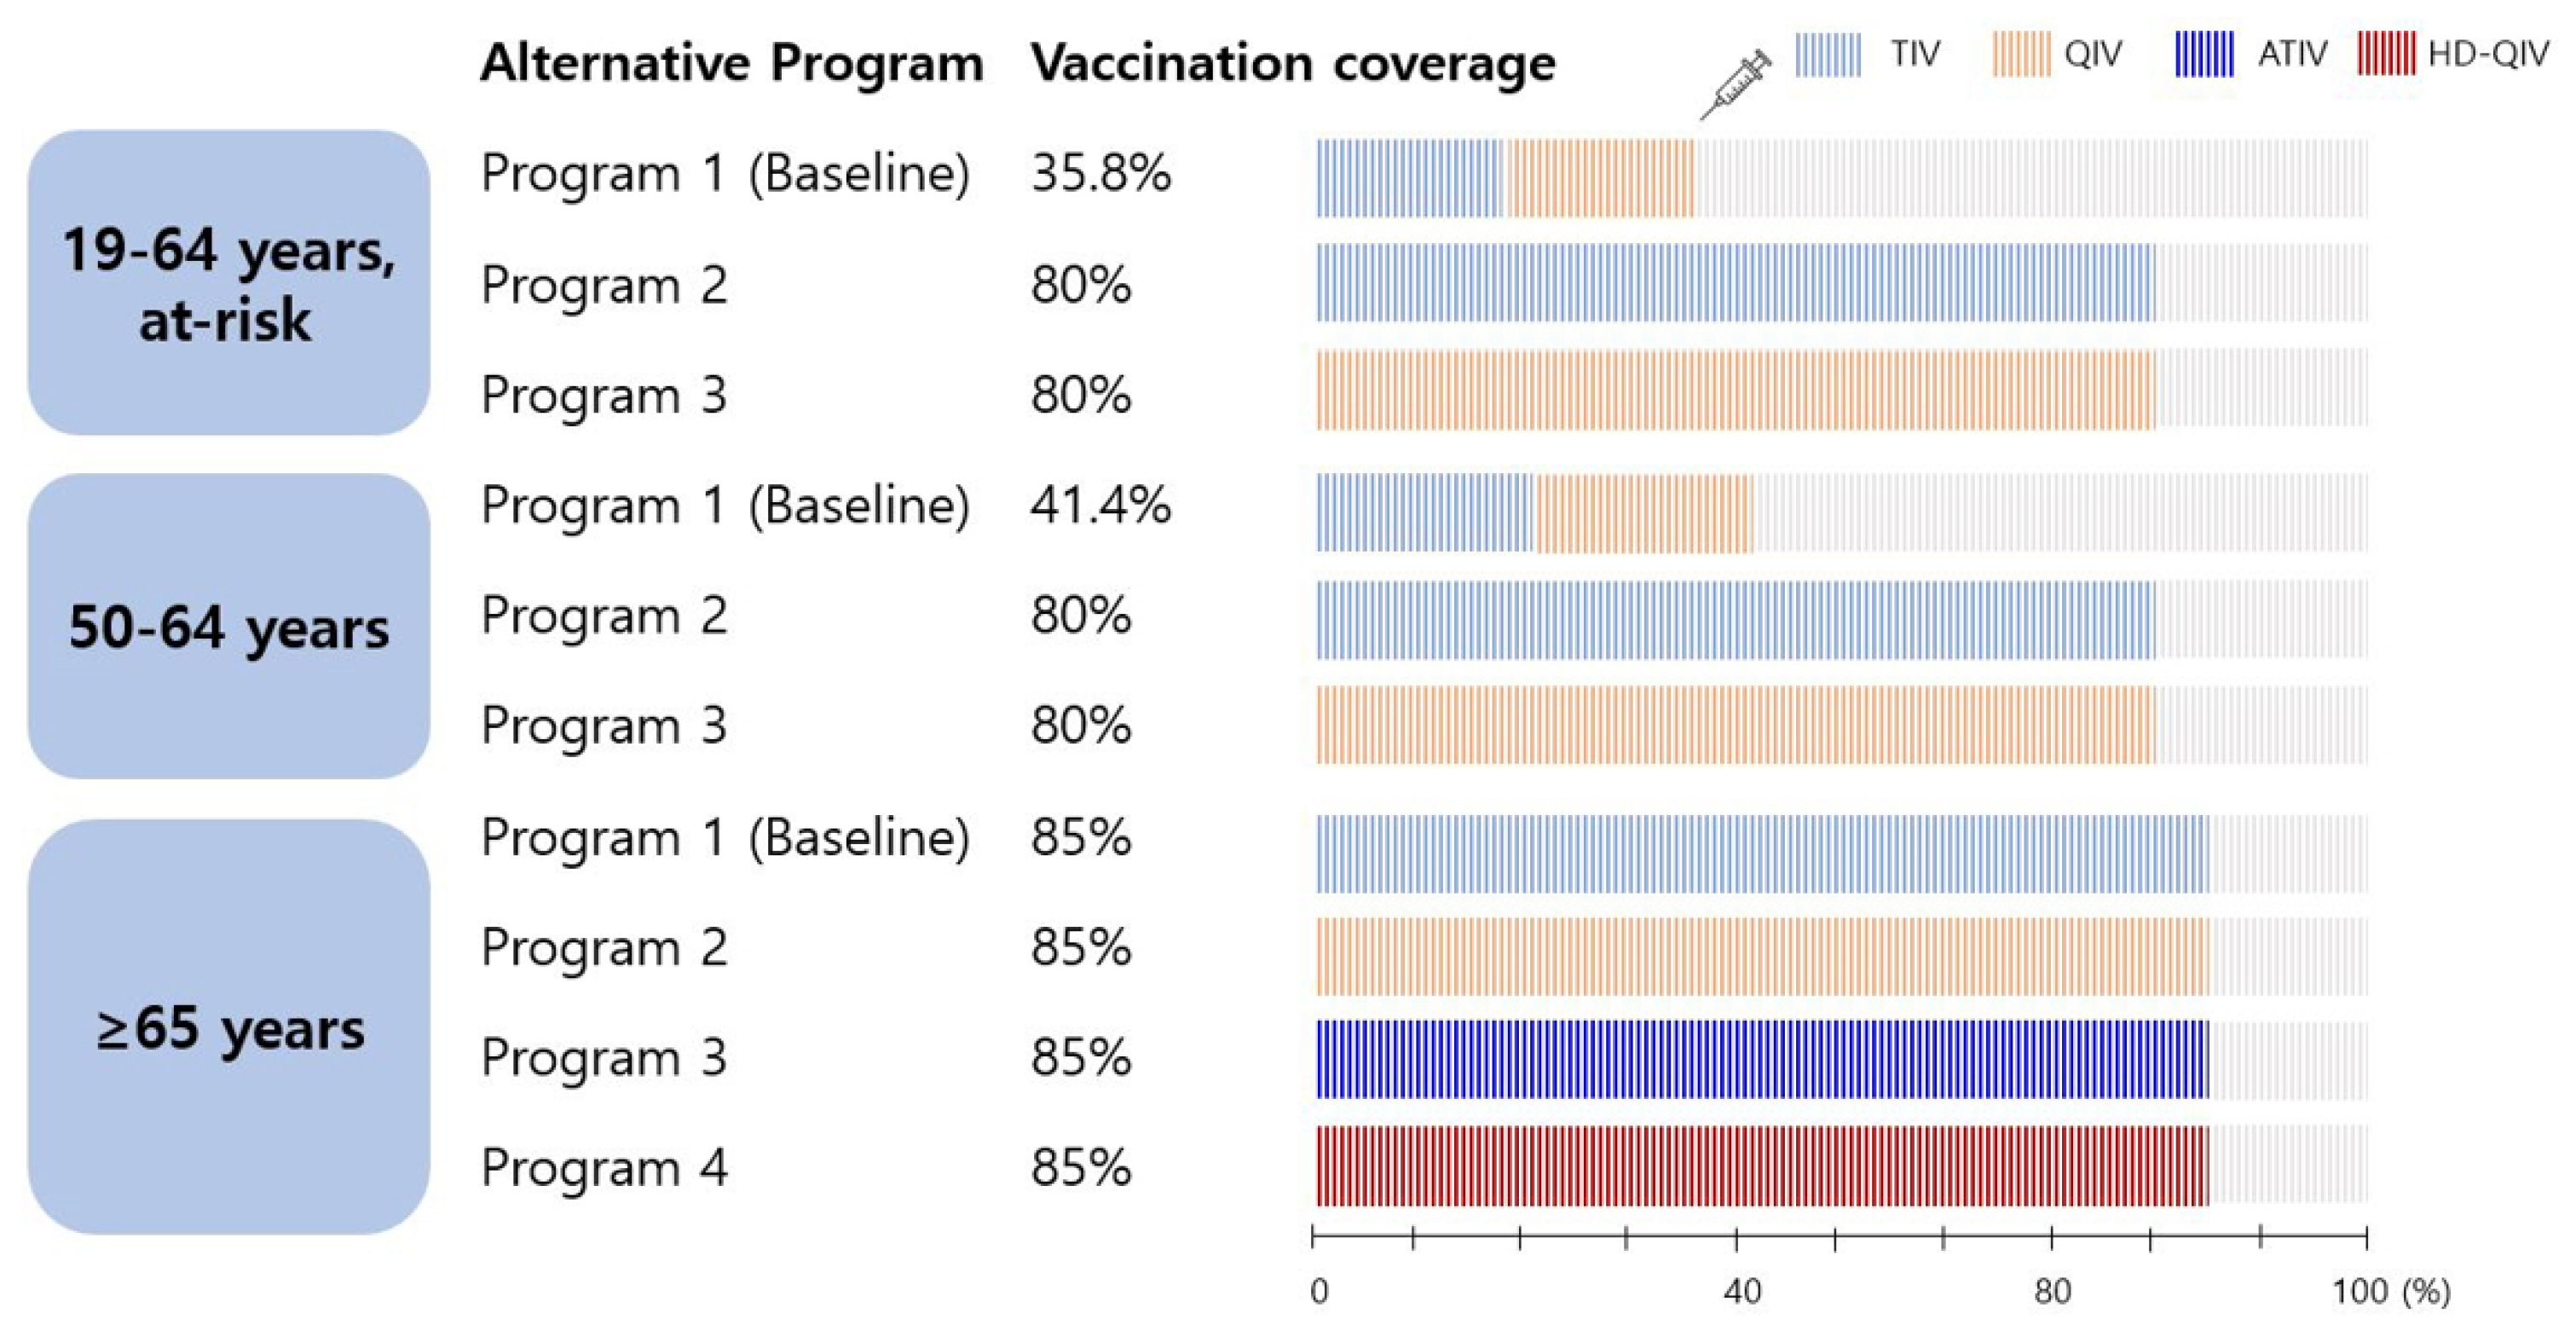 Rate of NIP vaccination in children with pNT.